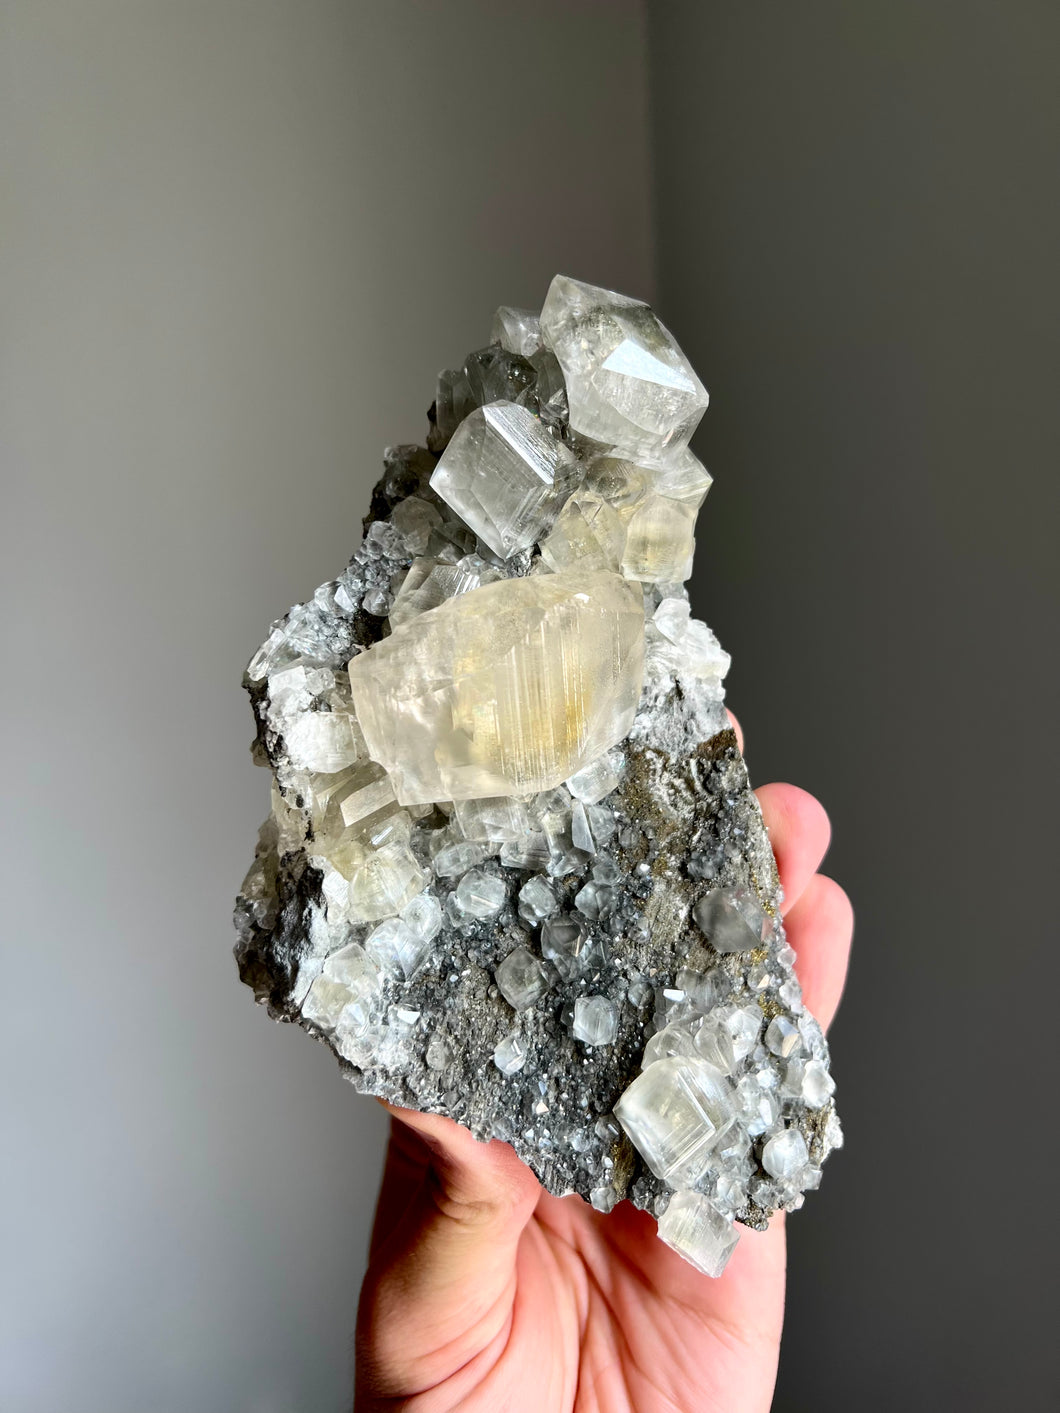 Calcite with Marcasite Inclusions - Linwood Mine, Scott County, Iowa